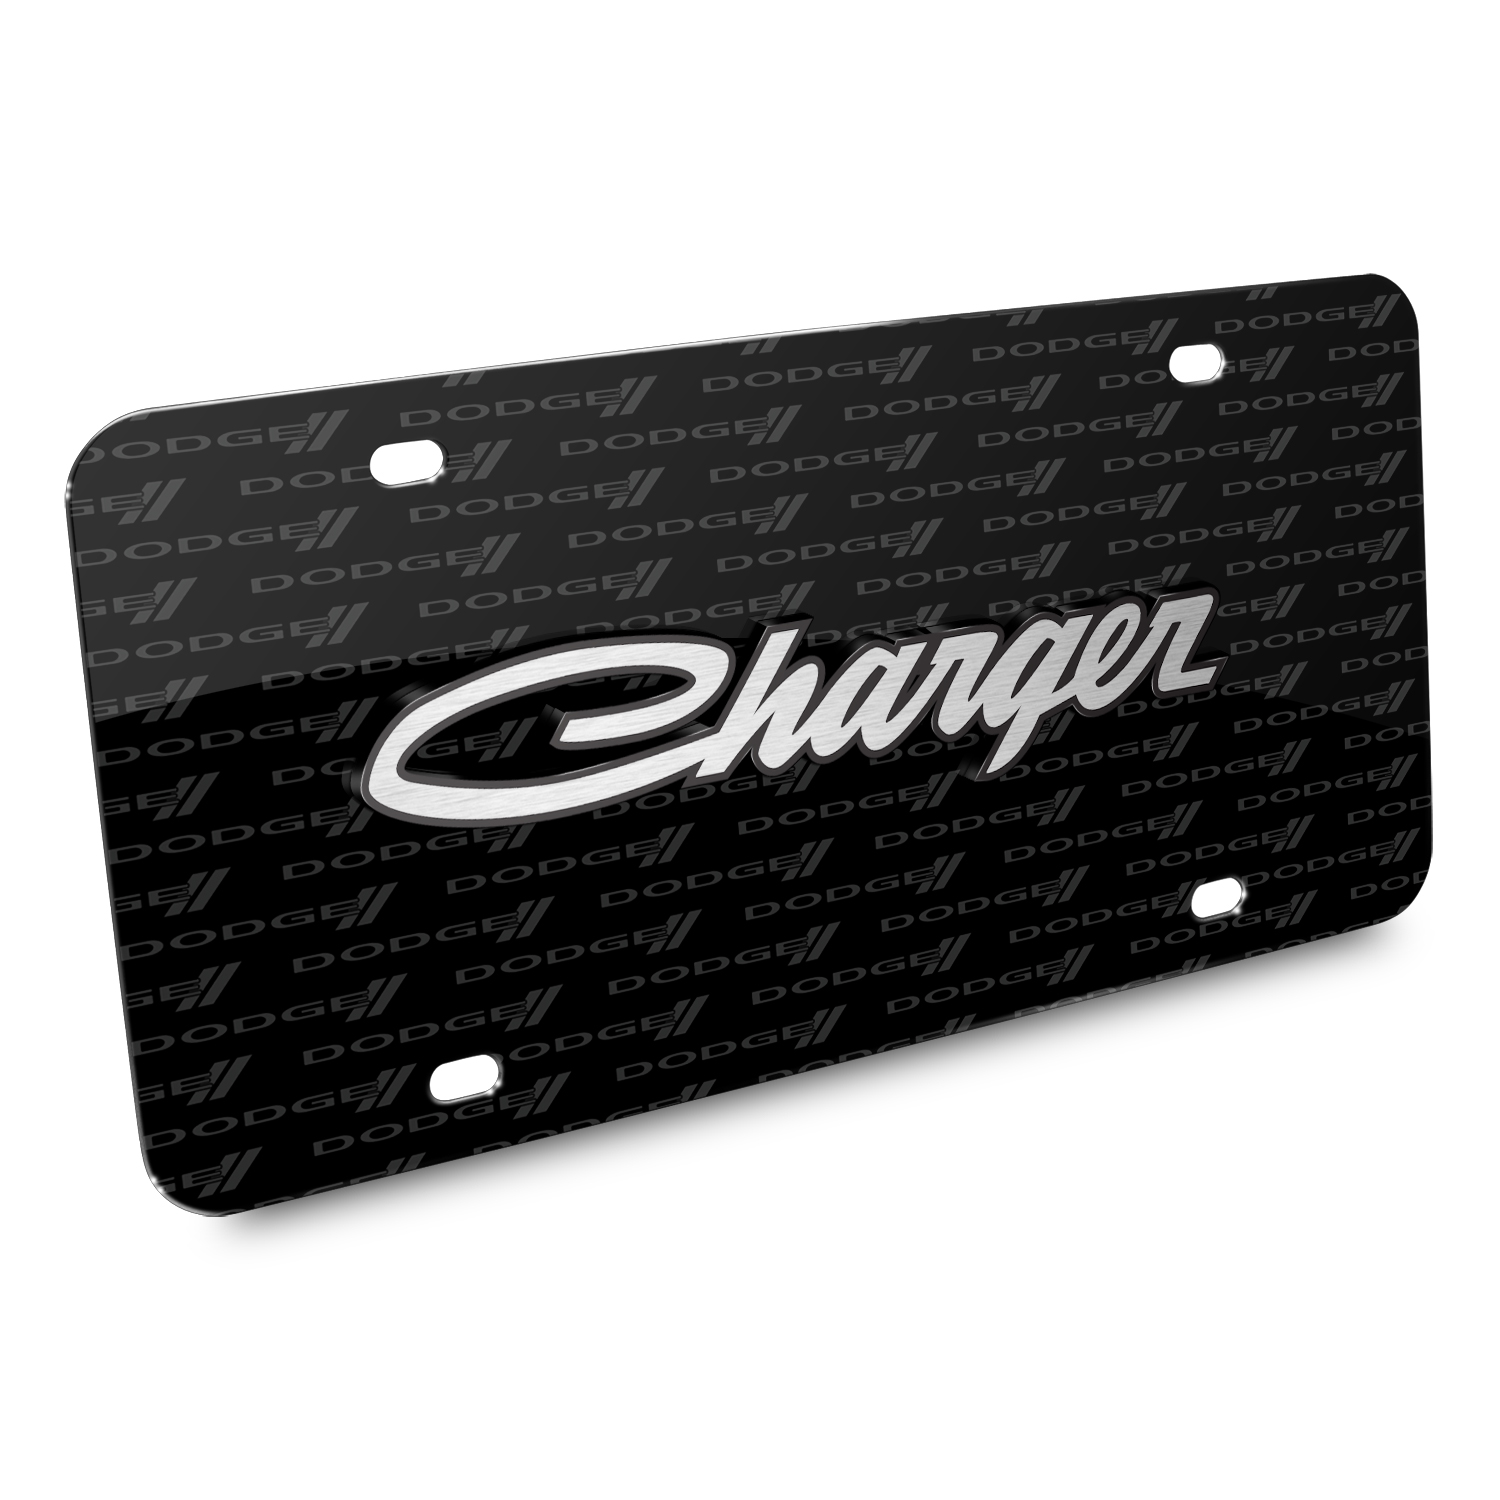 Dodge Charger Classic 3D Logo on Logo Pattern Black Aluminum License Plate - image 2 of 6